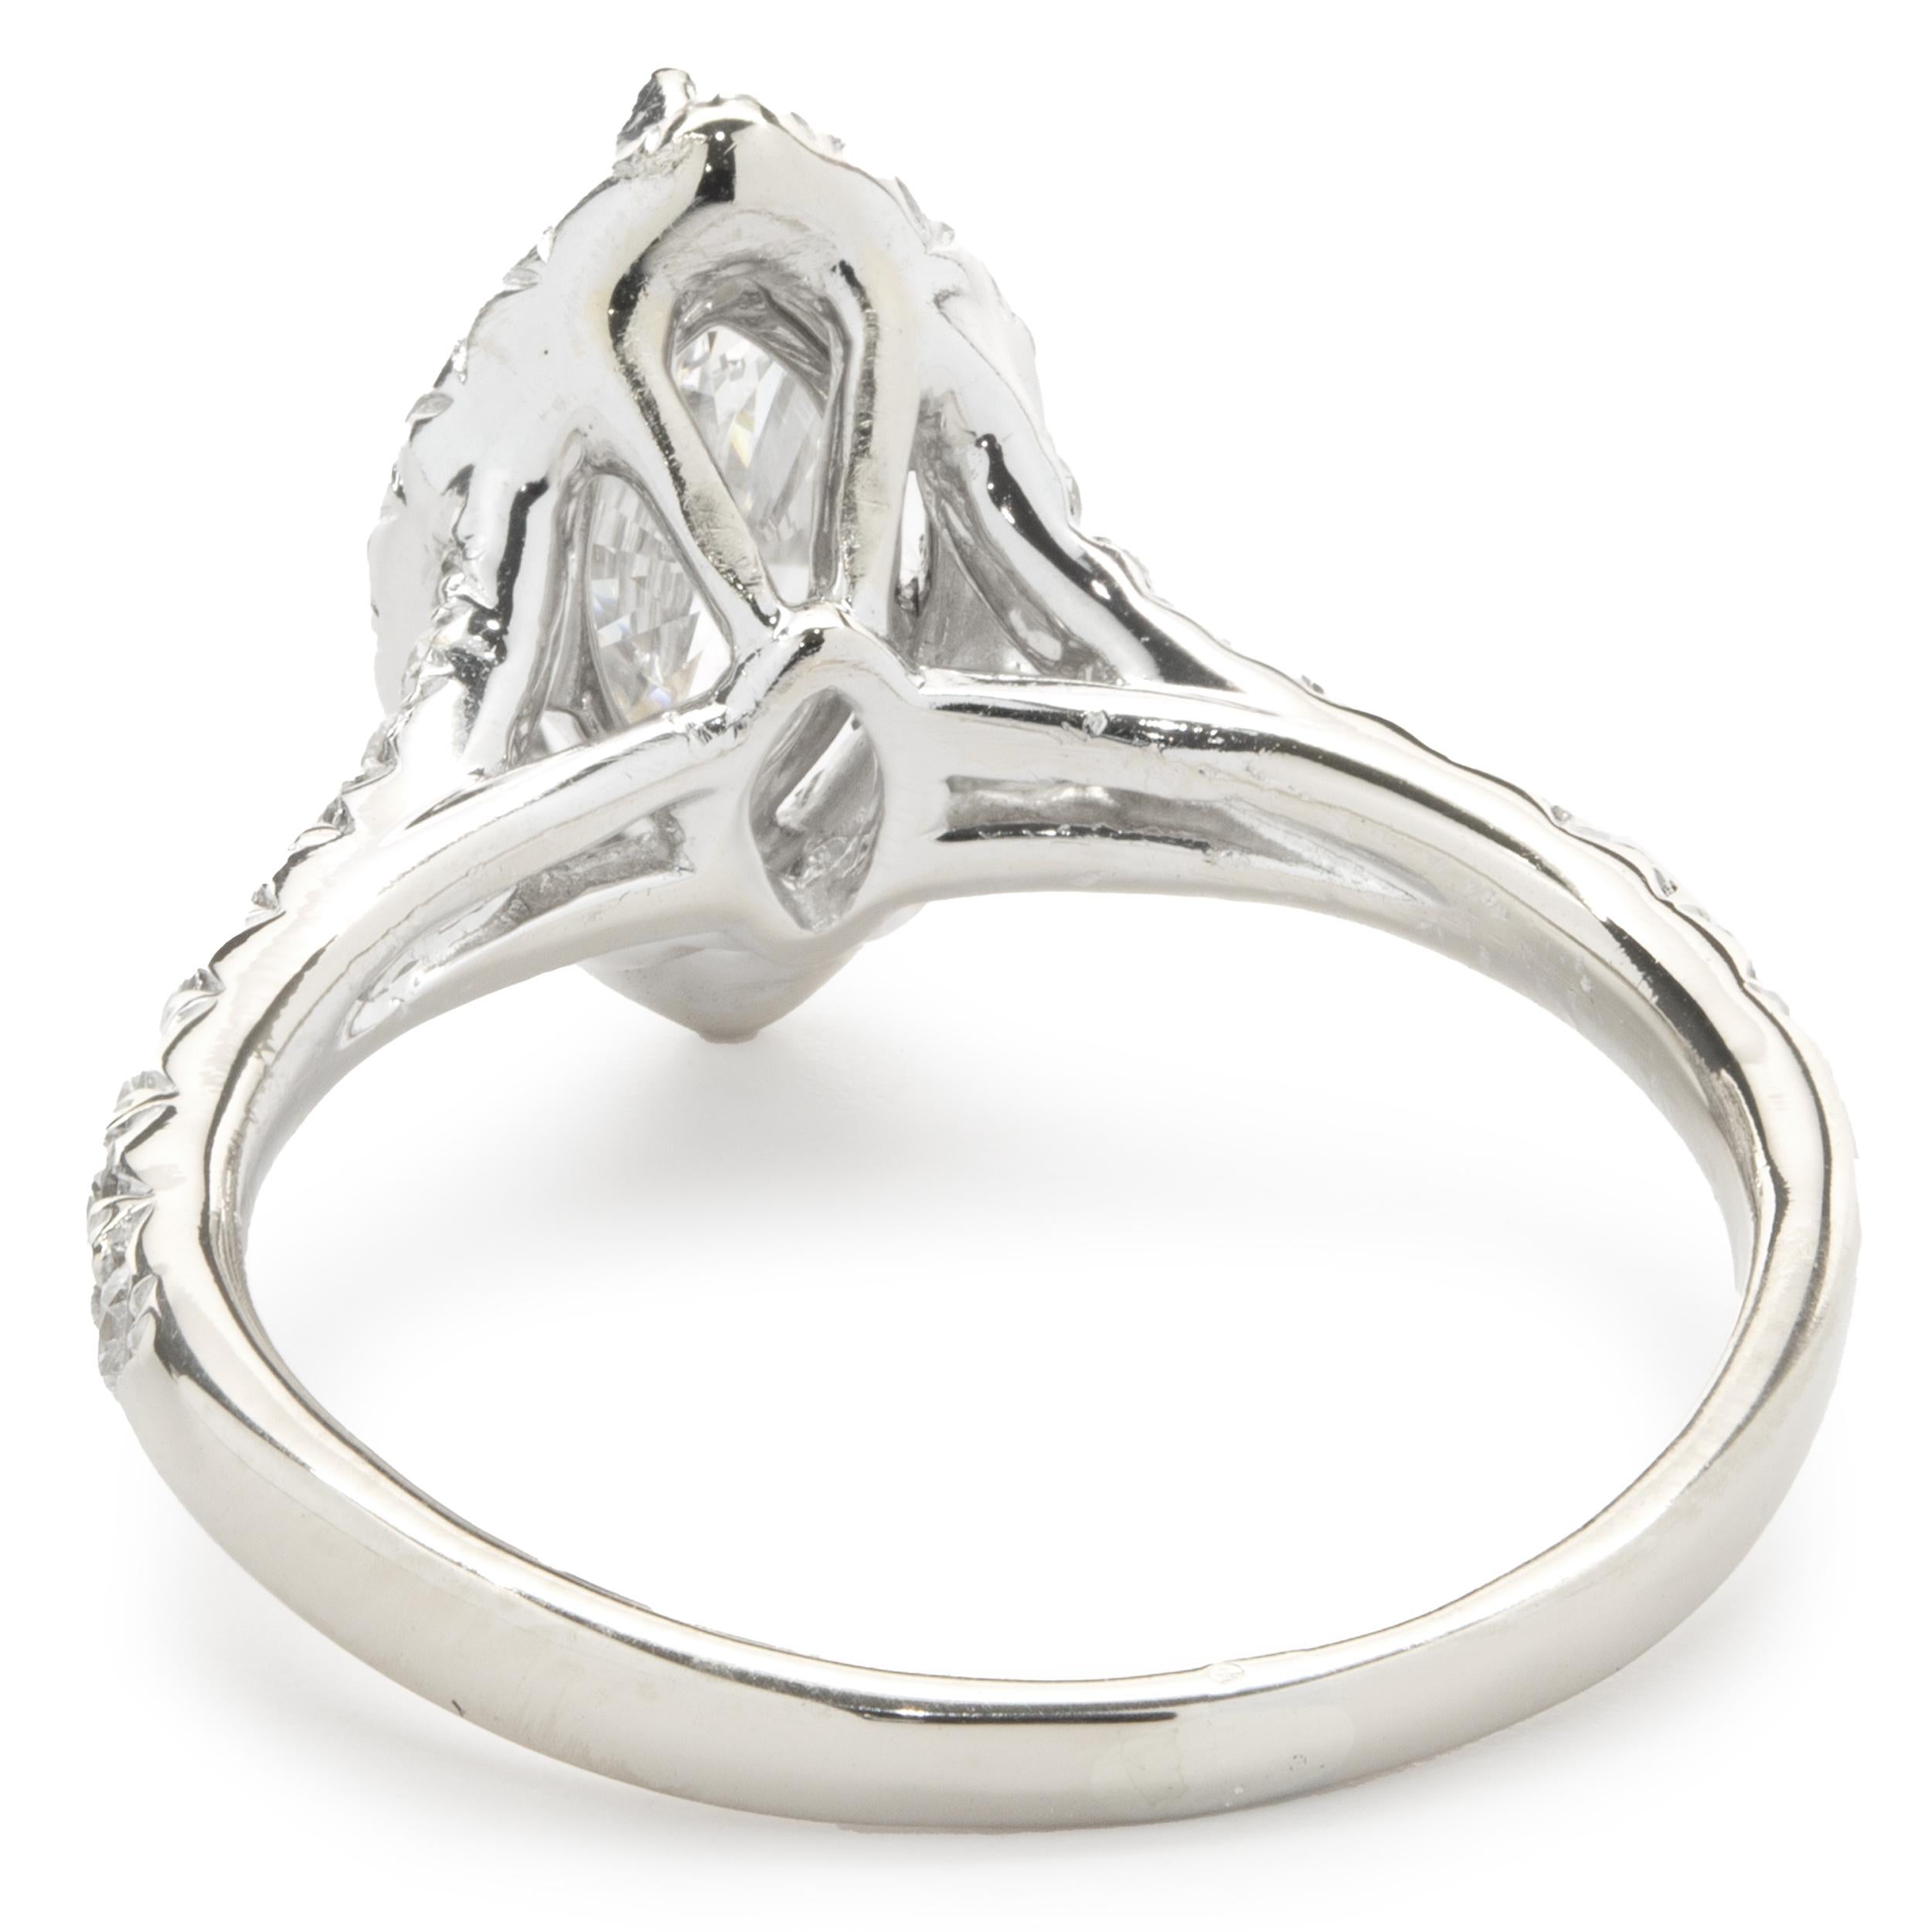 14 Karat White Gold Marquise Cut Diamond Engagement Ring In Excellent Condition For Sale In Scottsdale, AZ